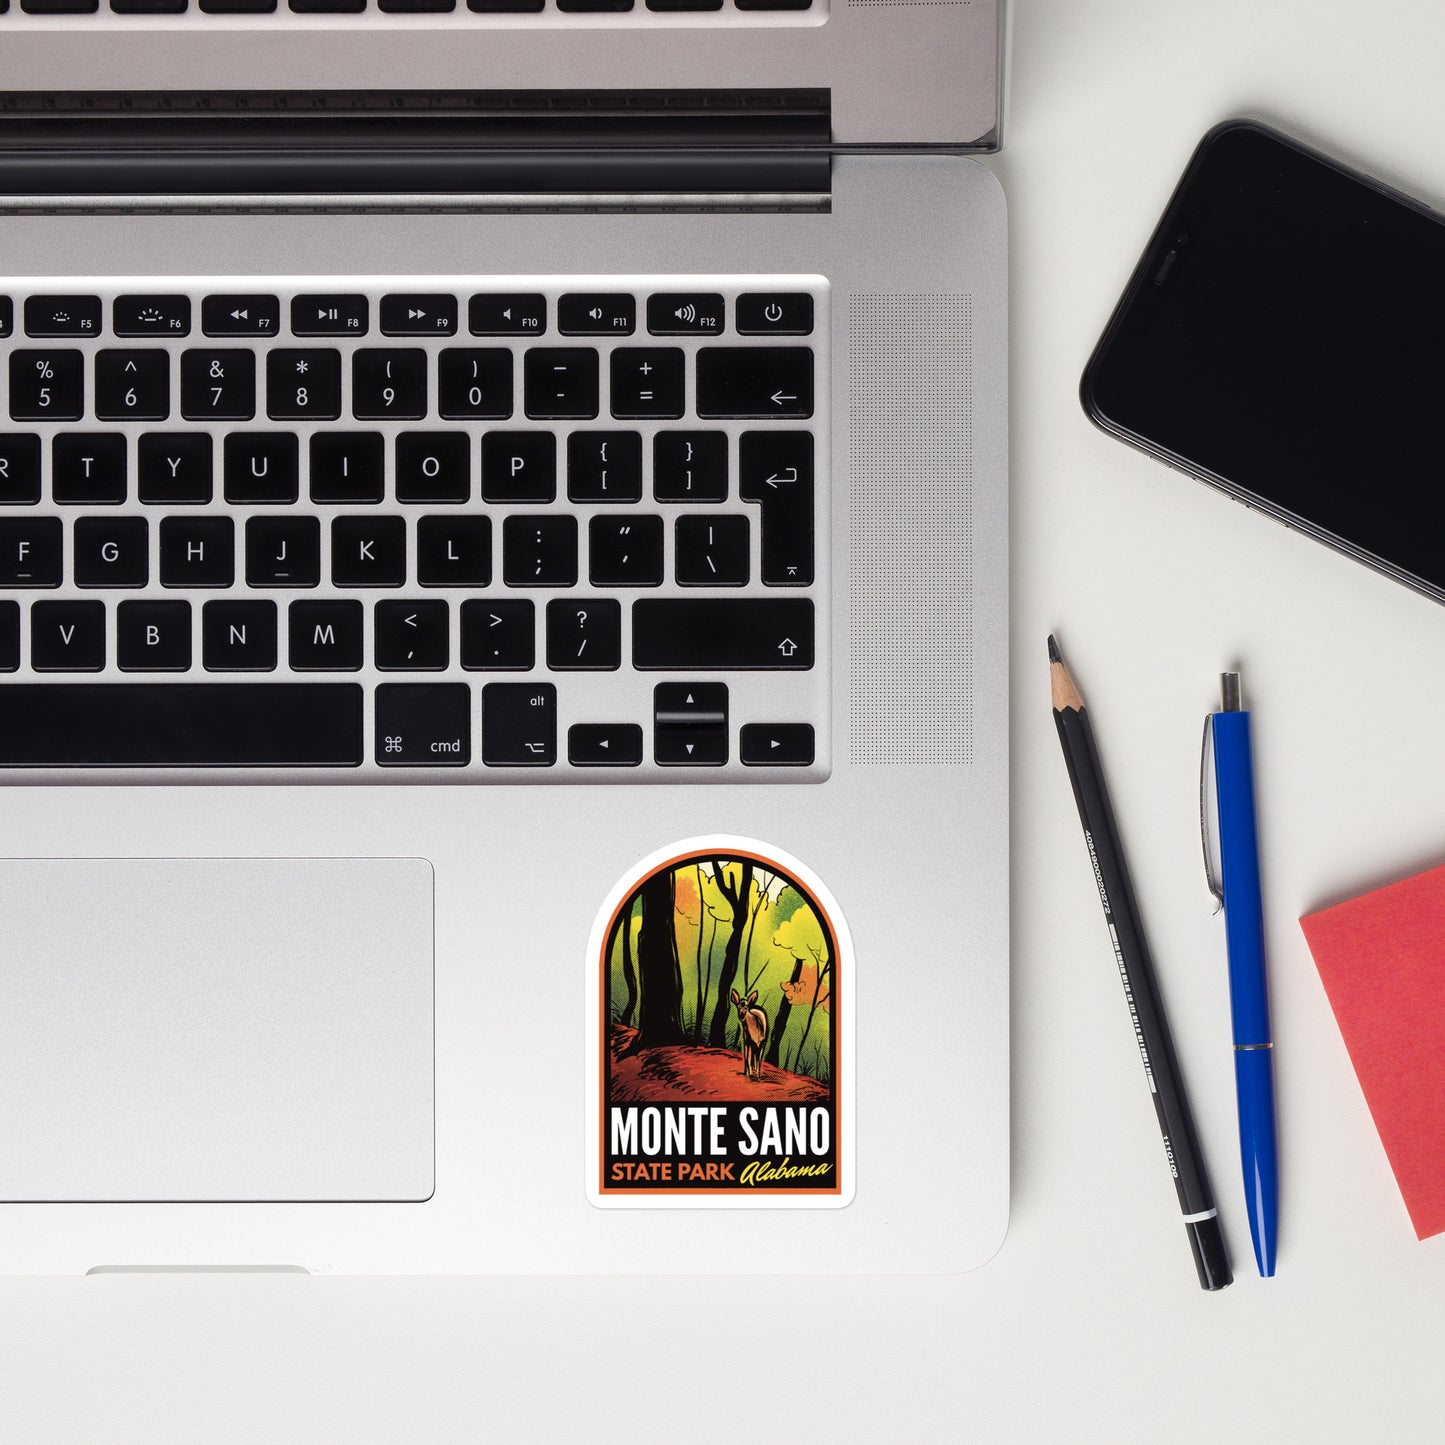 A sticker of Monte Sano State Park on a laptop